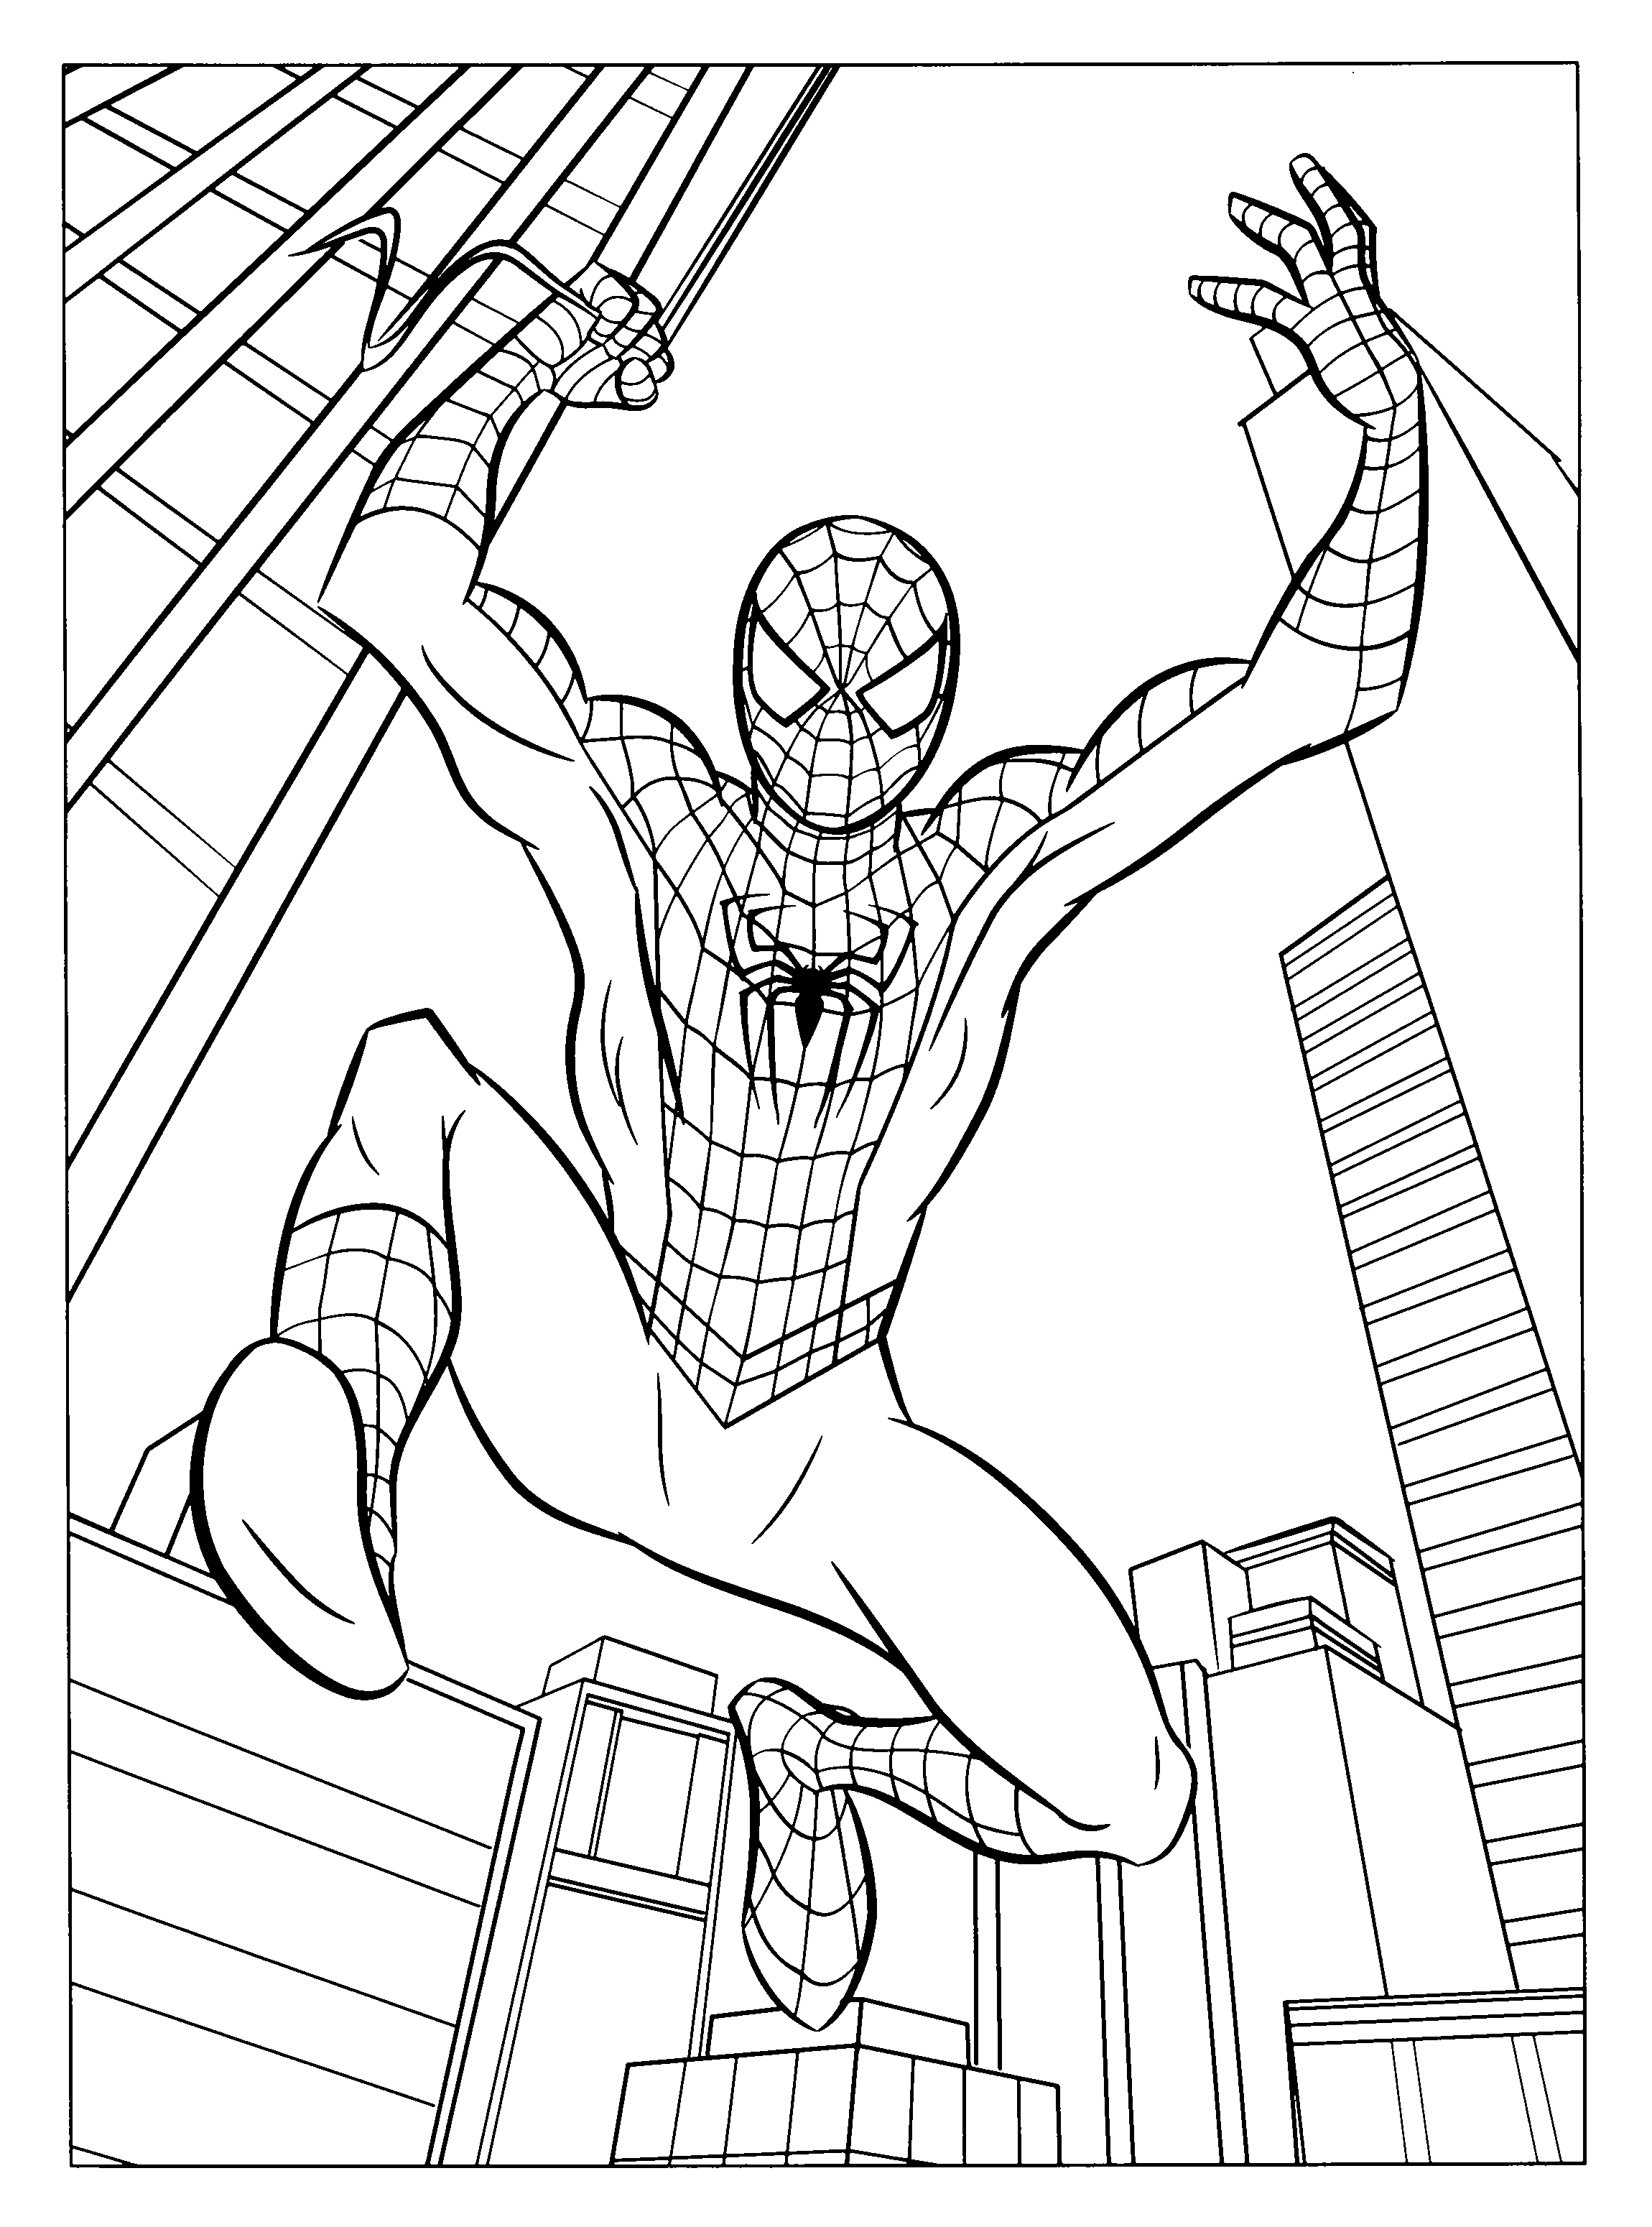 Spiderman Coloring Pages For Boys